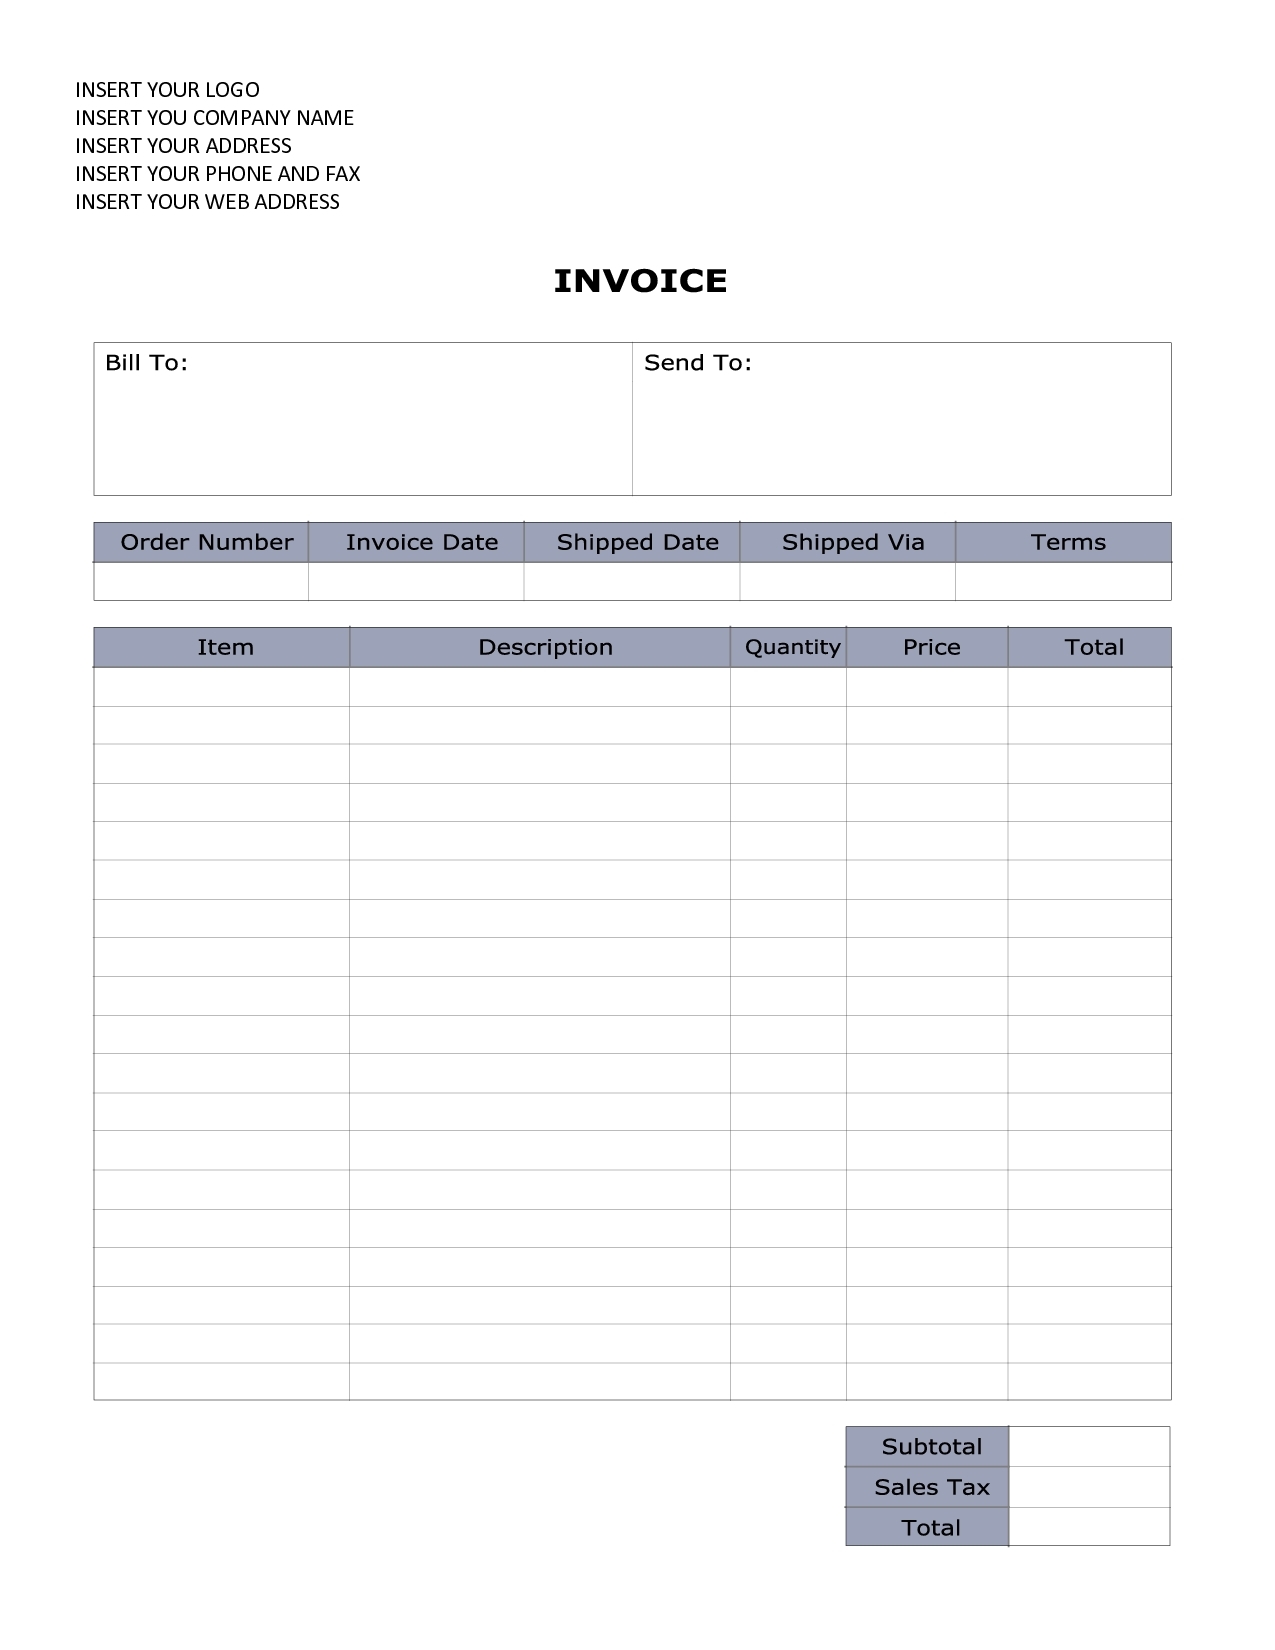 invoice template for word invoice template word invoice template free 2016 1275 X 1650